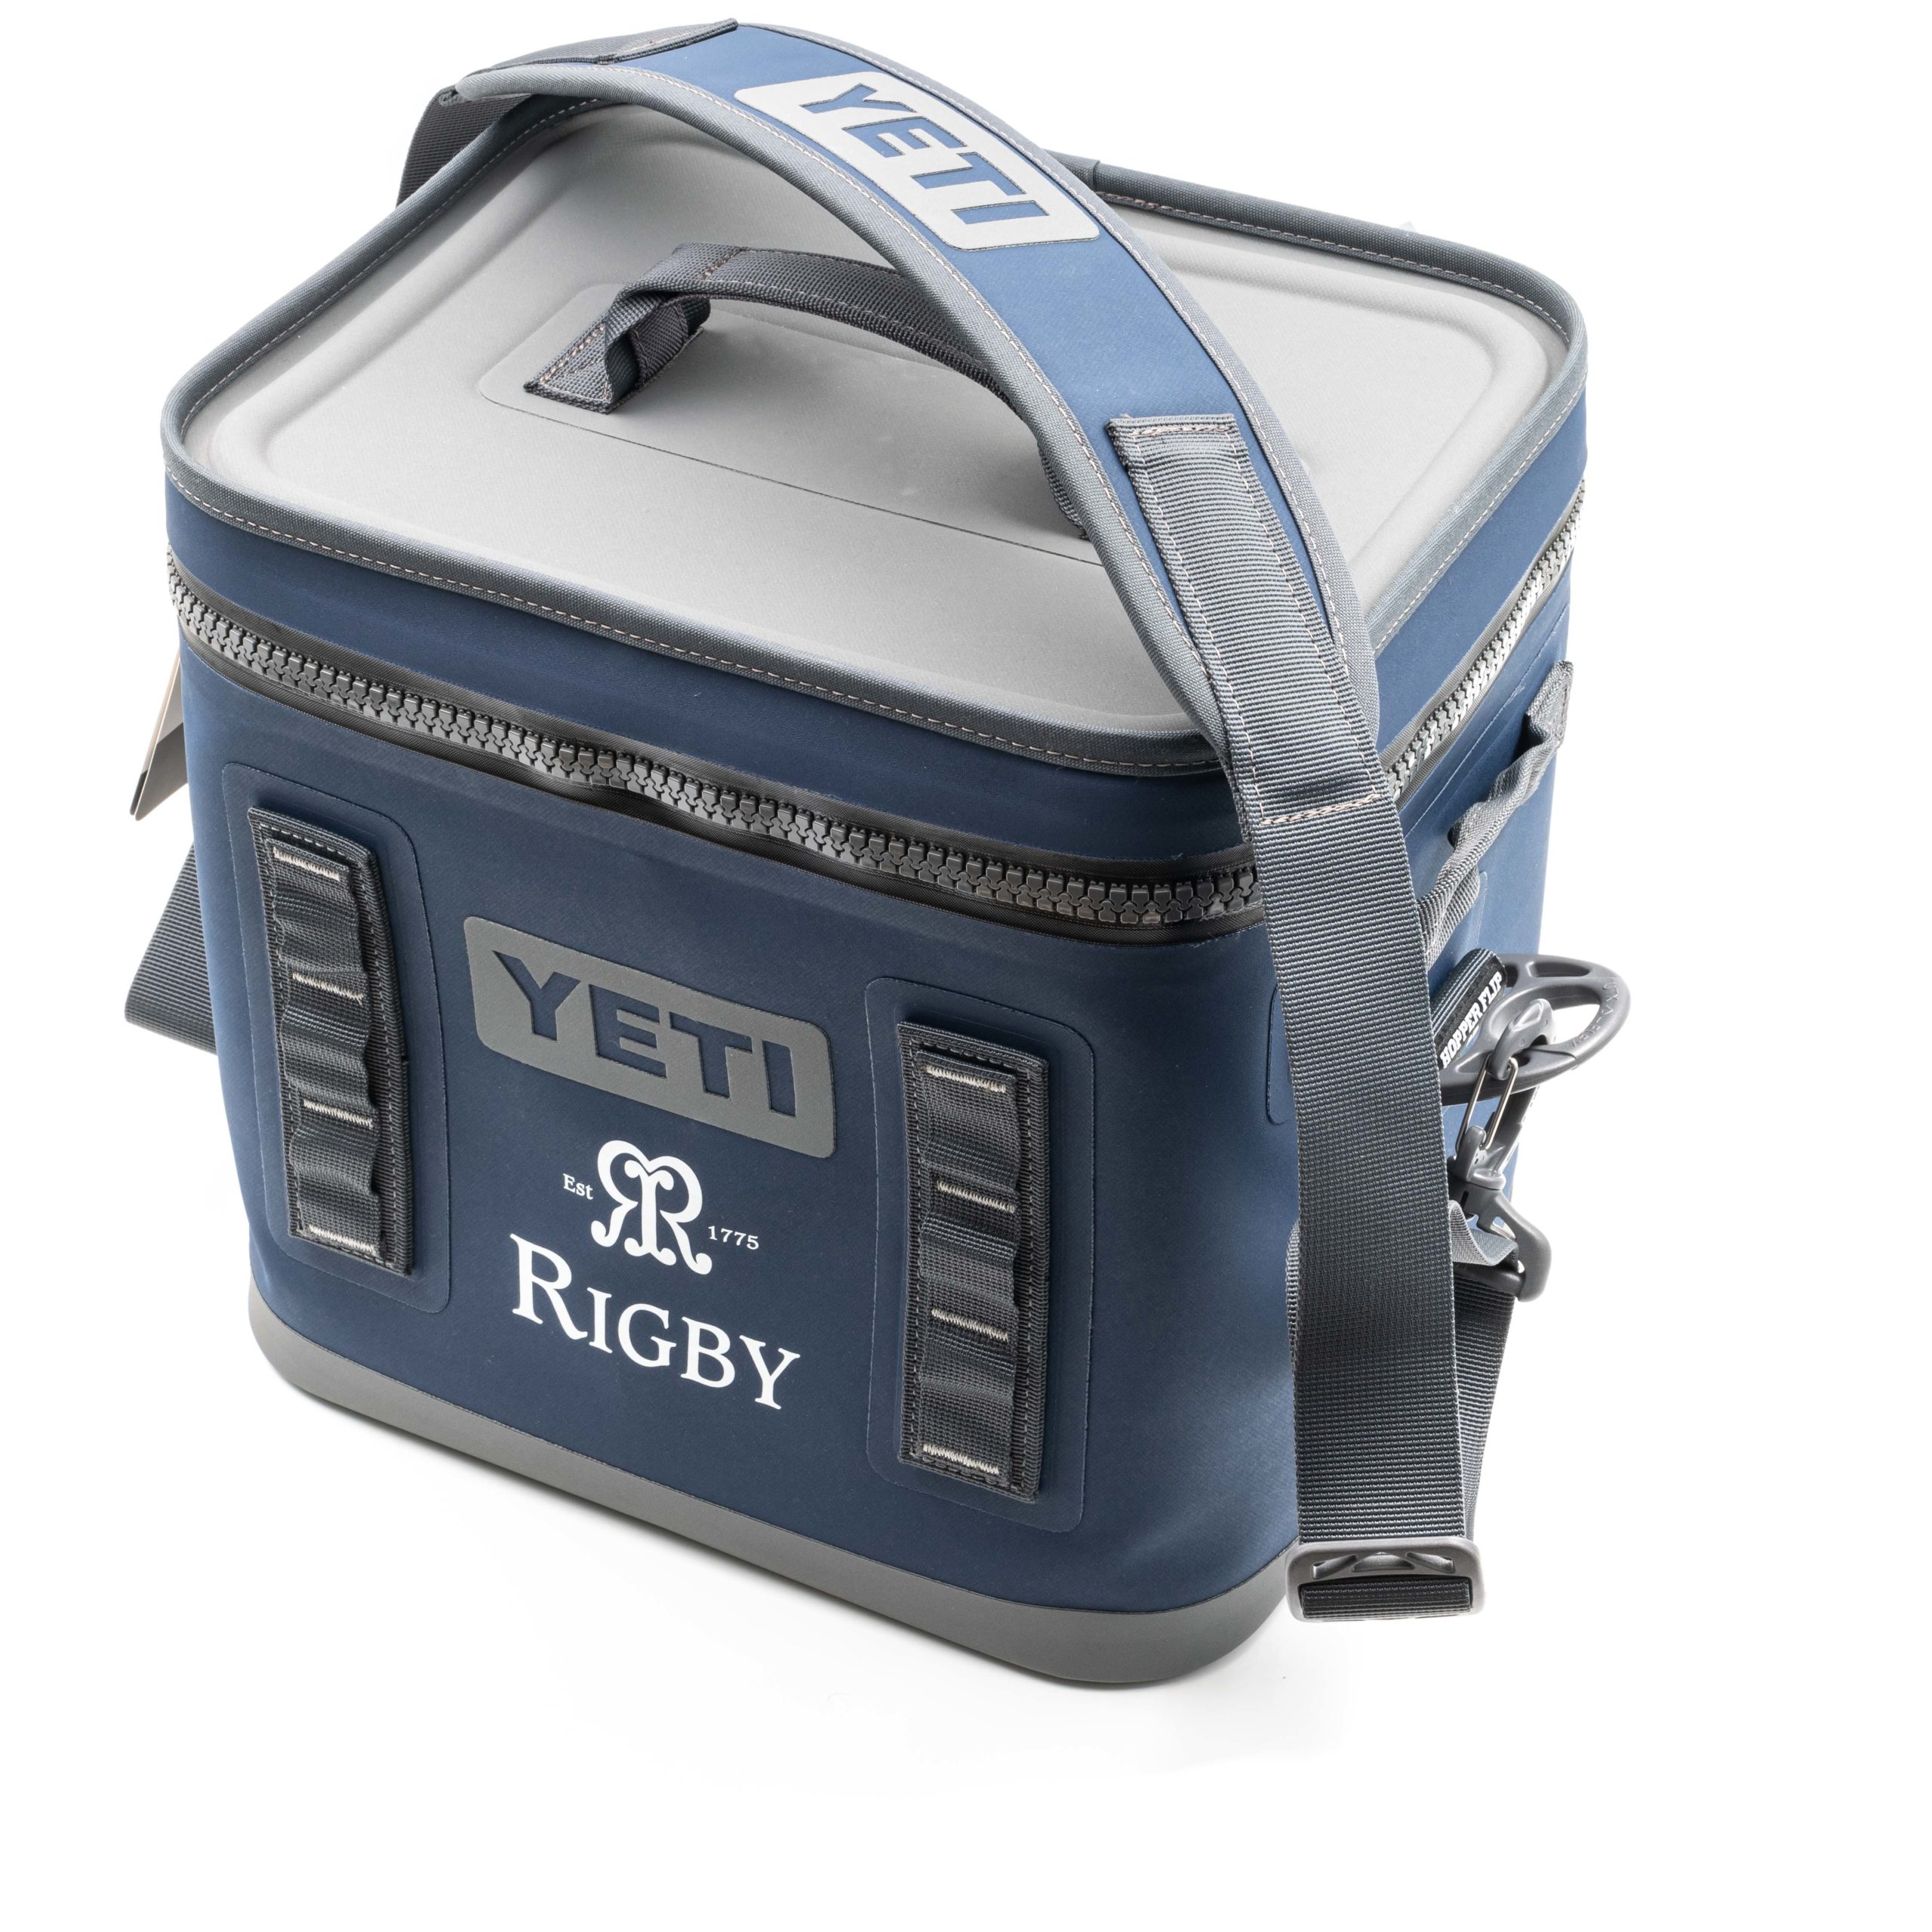 Yeti Hopper Flip Coolers with Accessories 